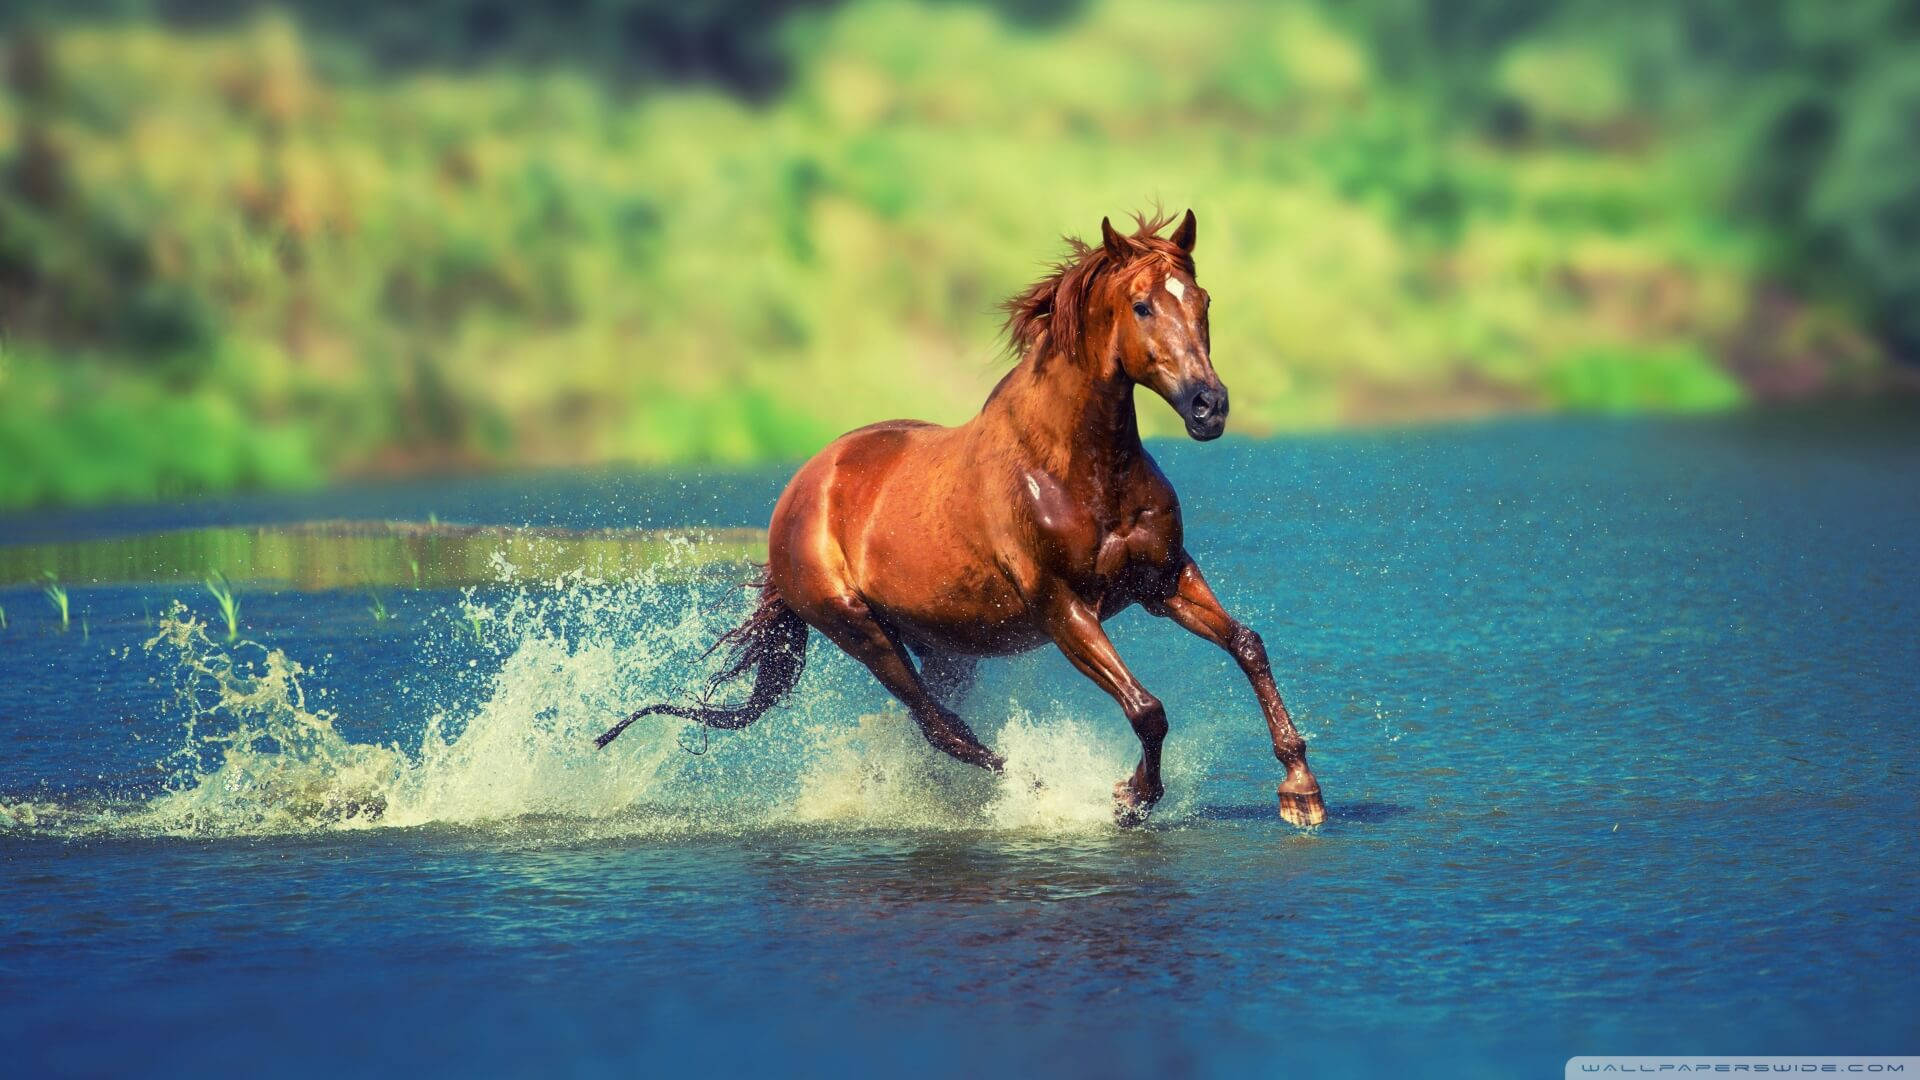 Galloping in Freedom Wallpaper